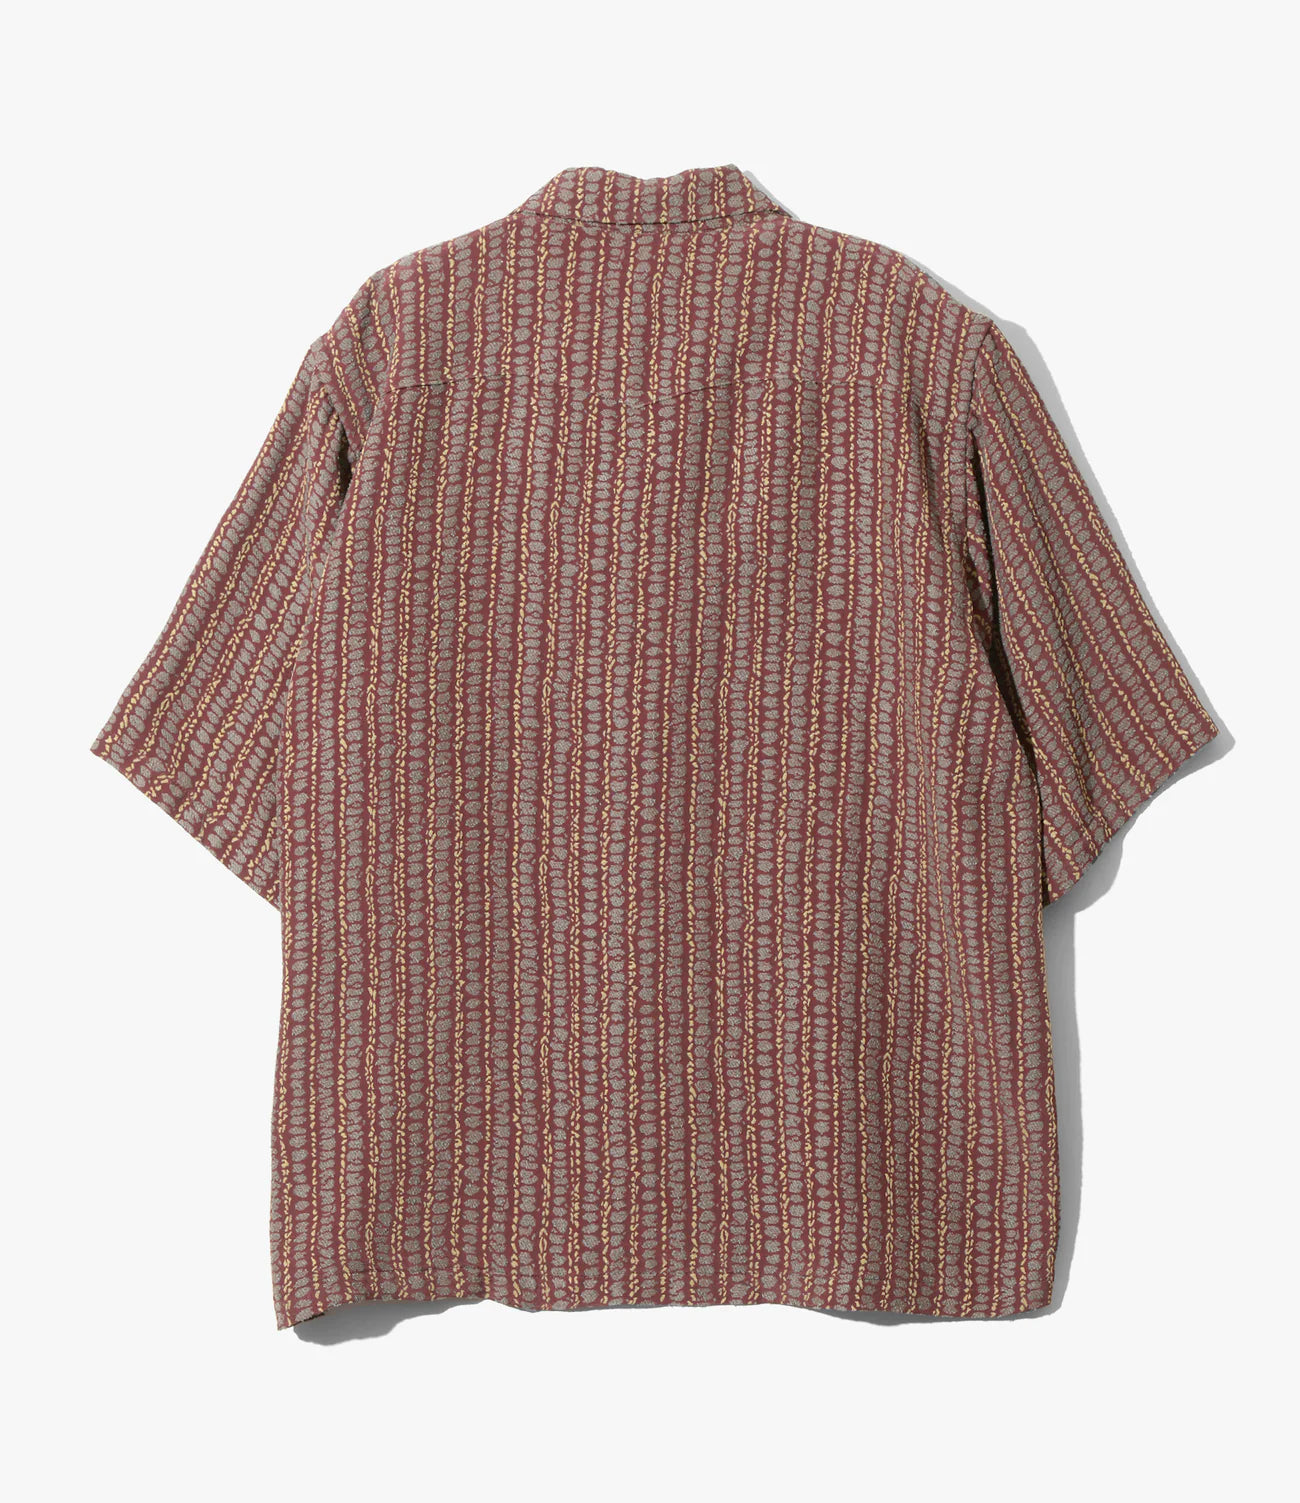 Needles S/S Cowboy One-Up Shirt - Abstract Stripe Jq - Bordeaux